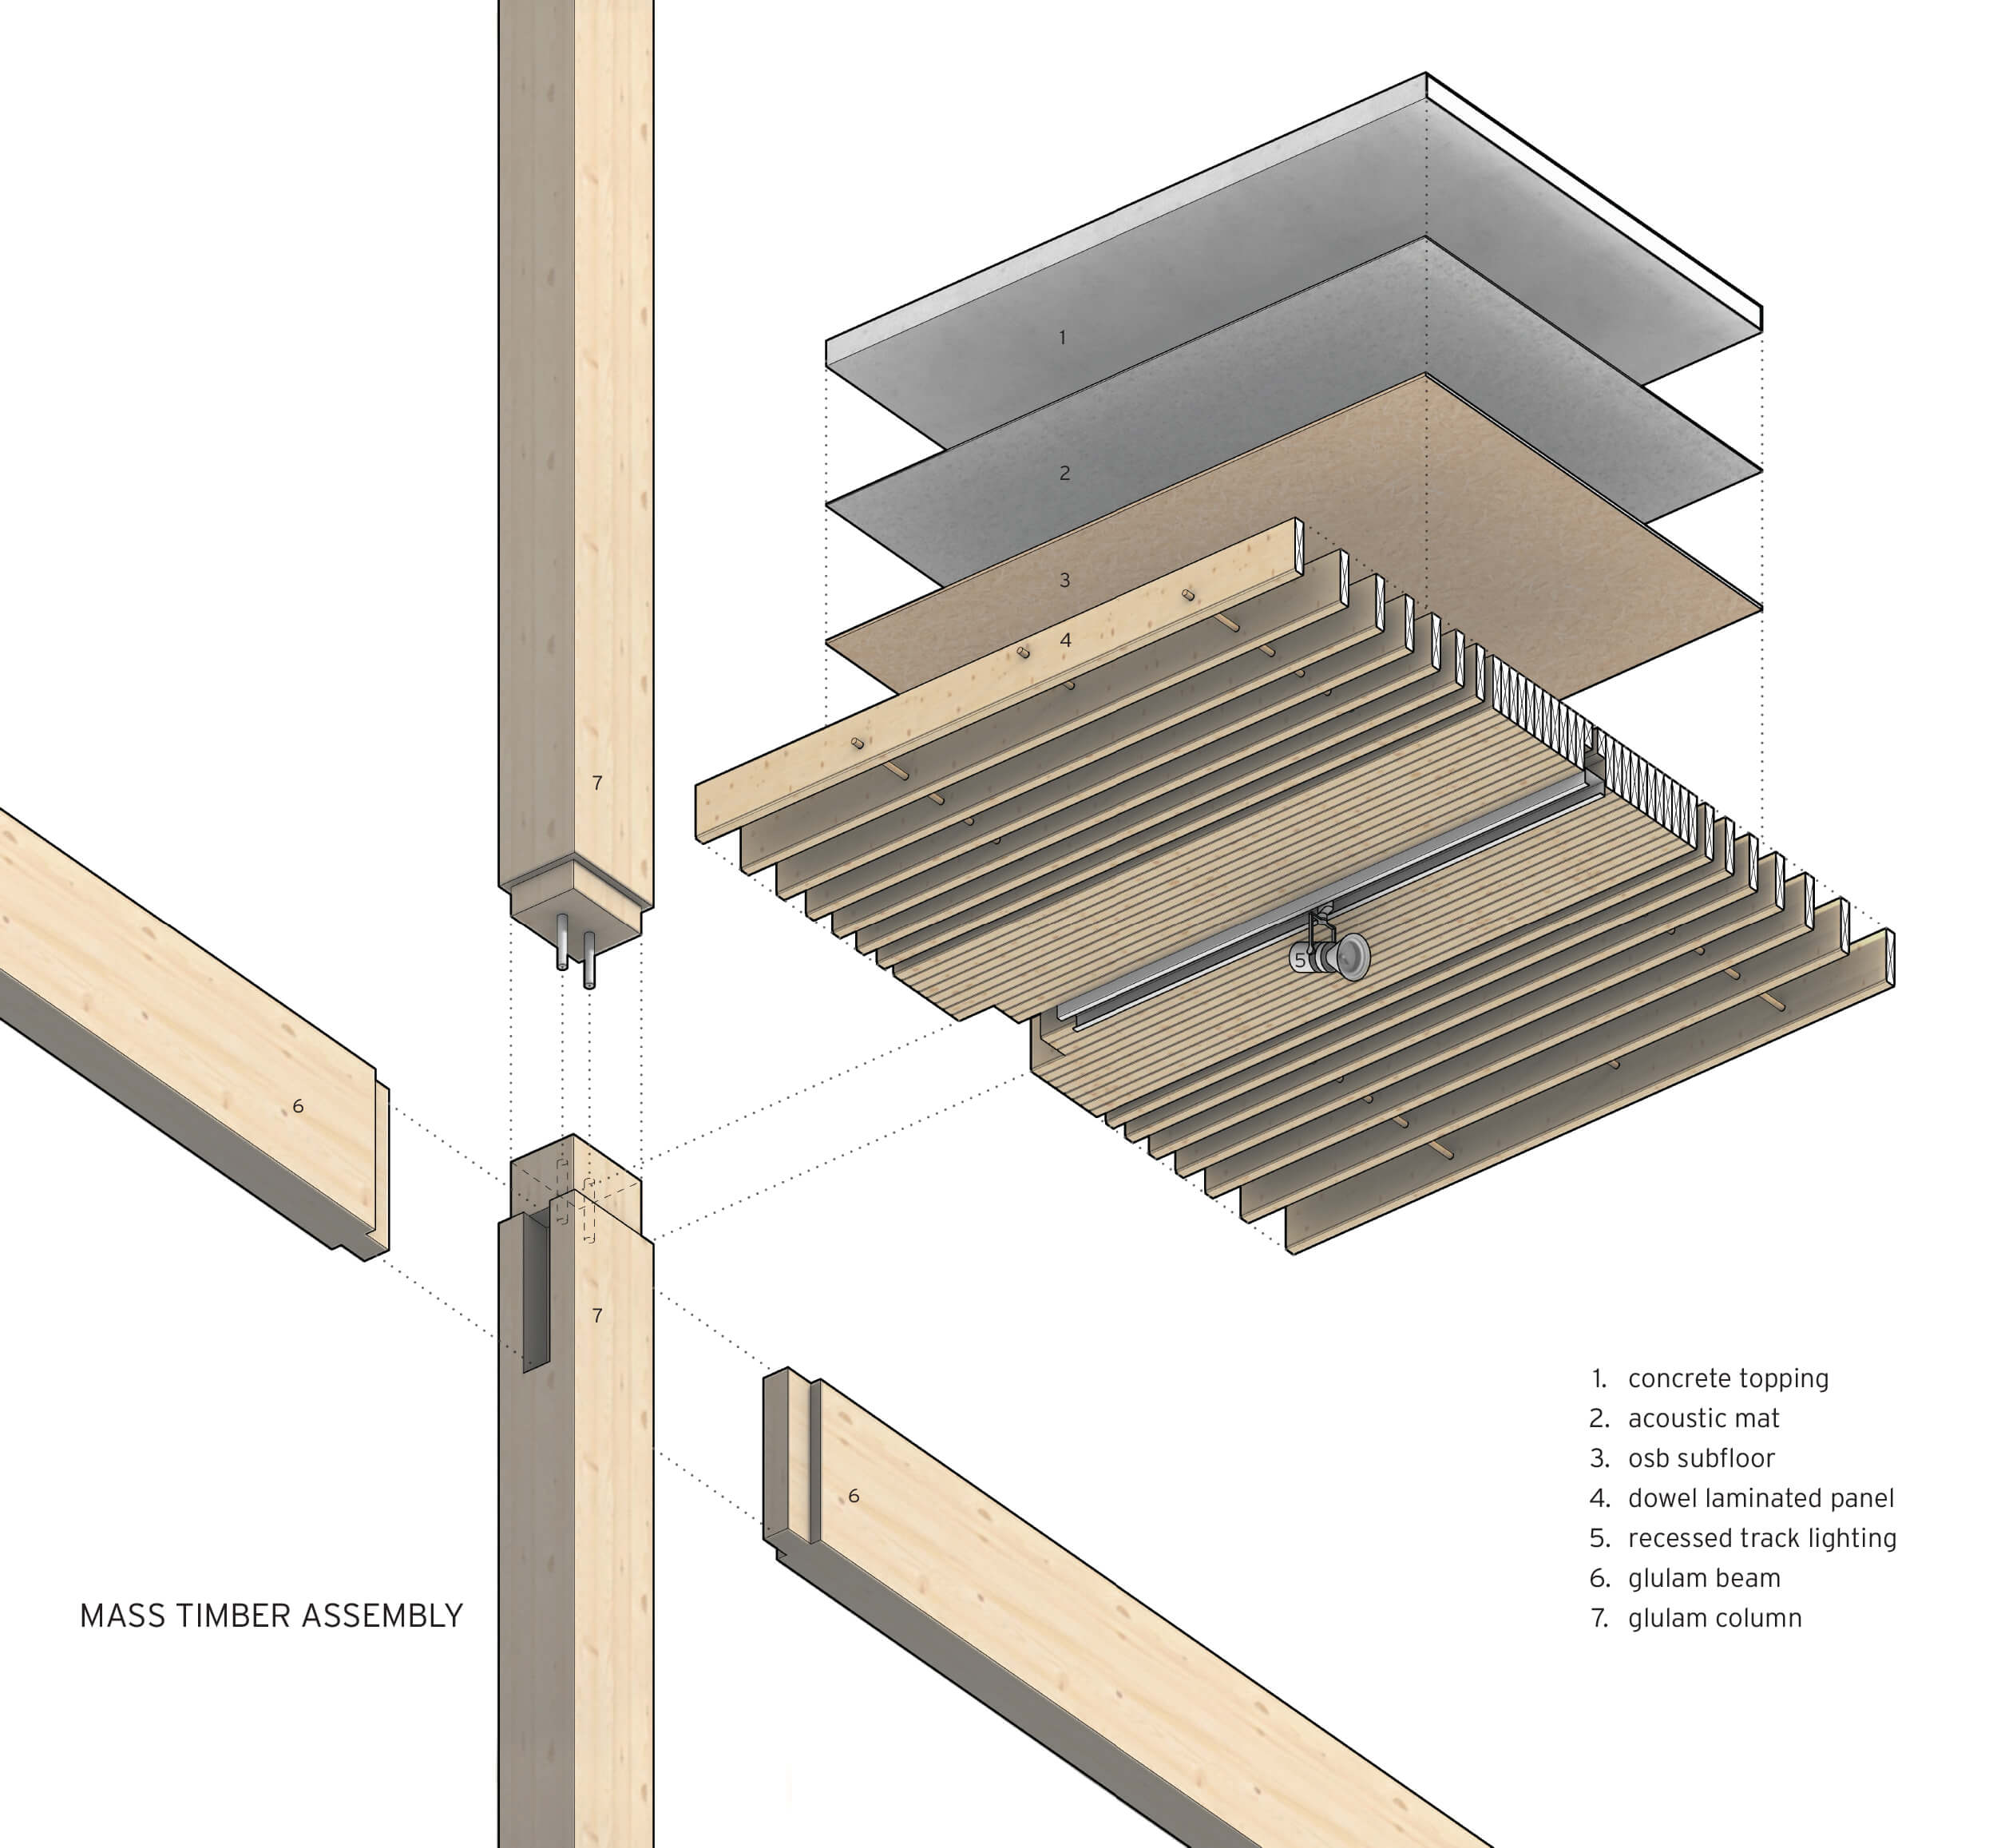 Diagram of a structural timber dowel assembly